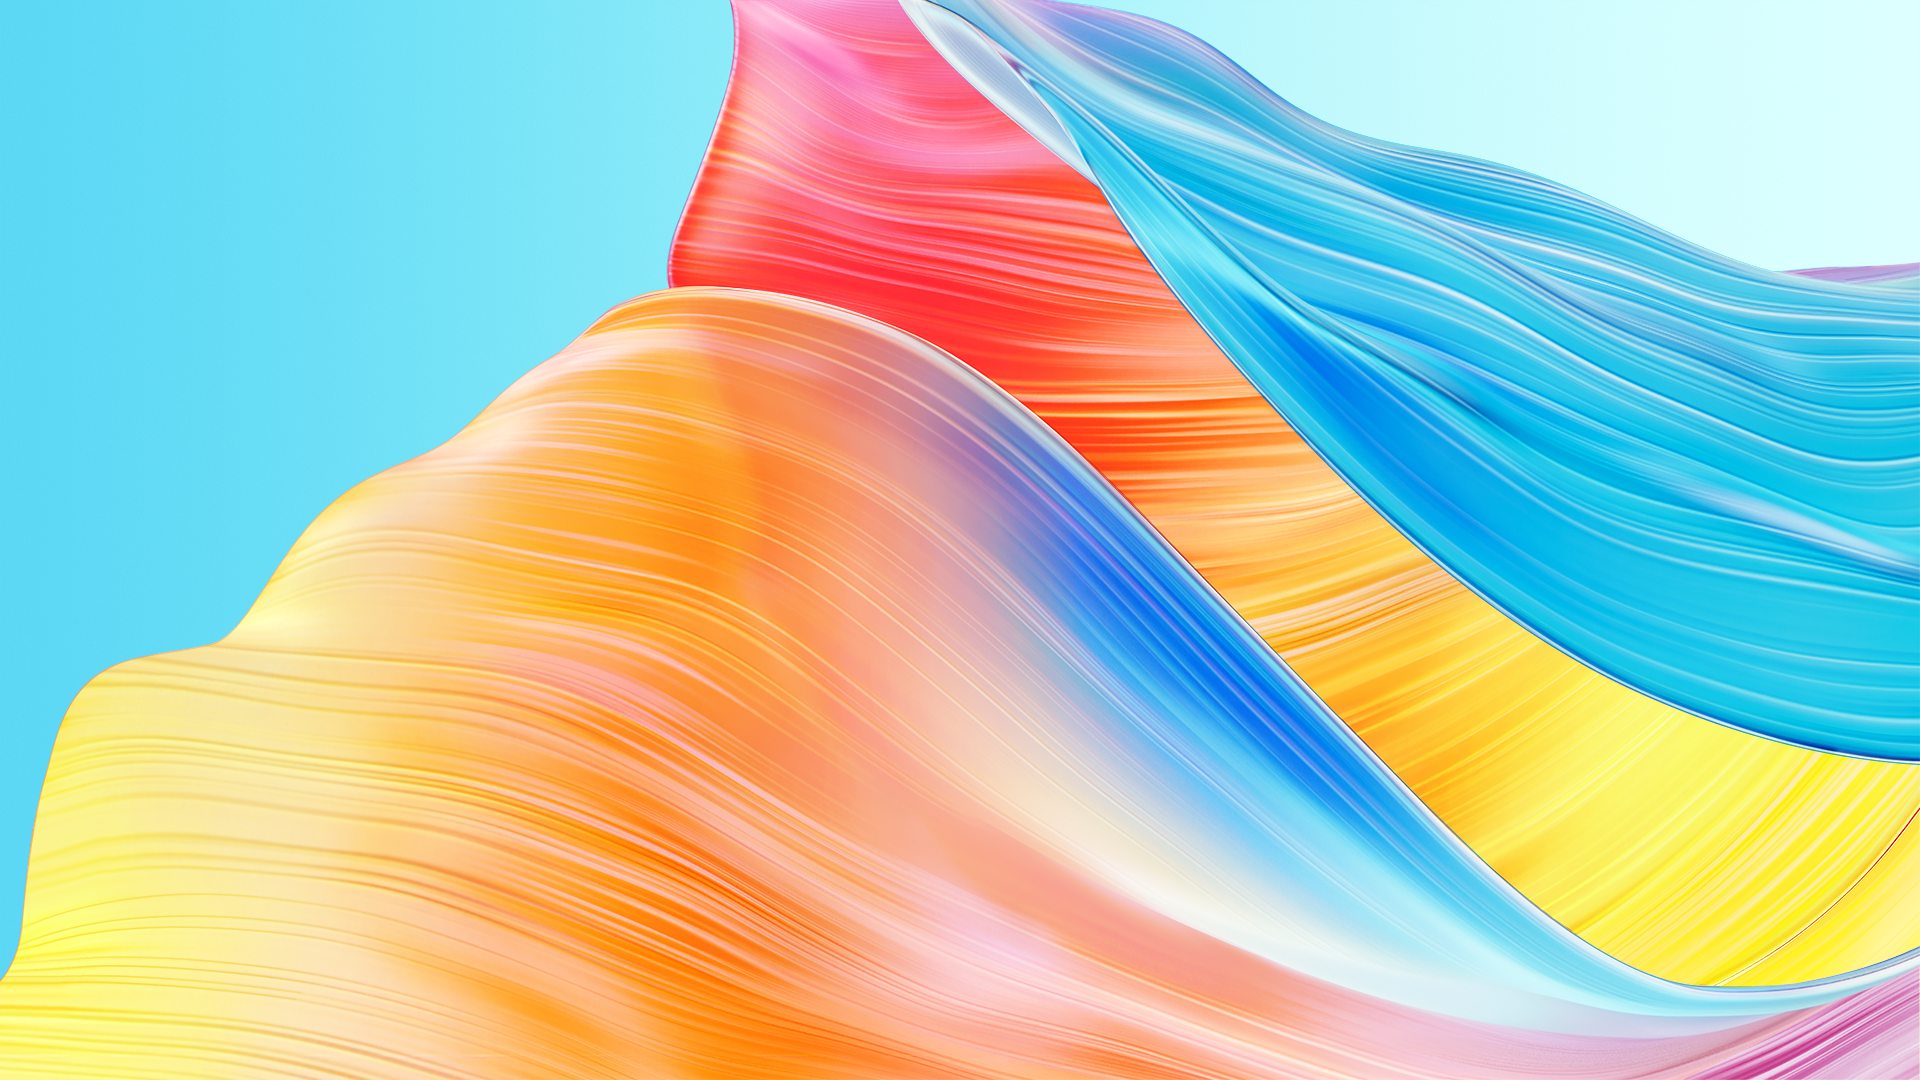 General 1920x1080 Oppo abstract colorful digital art simple background